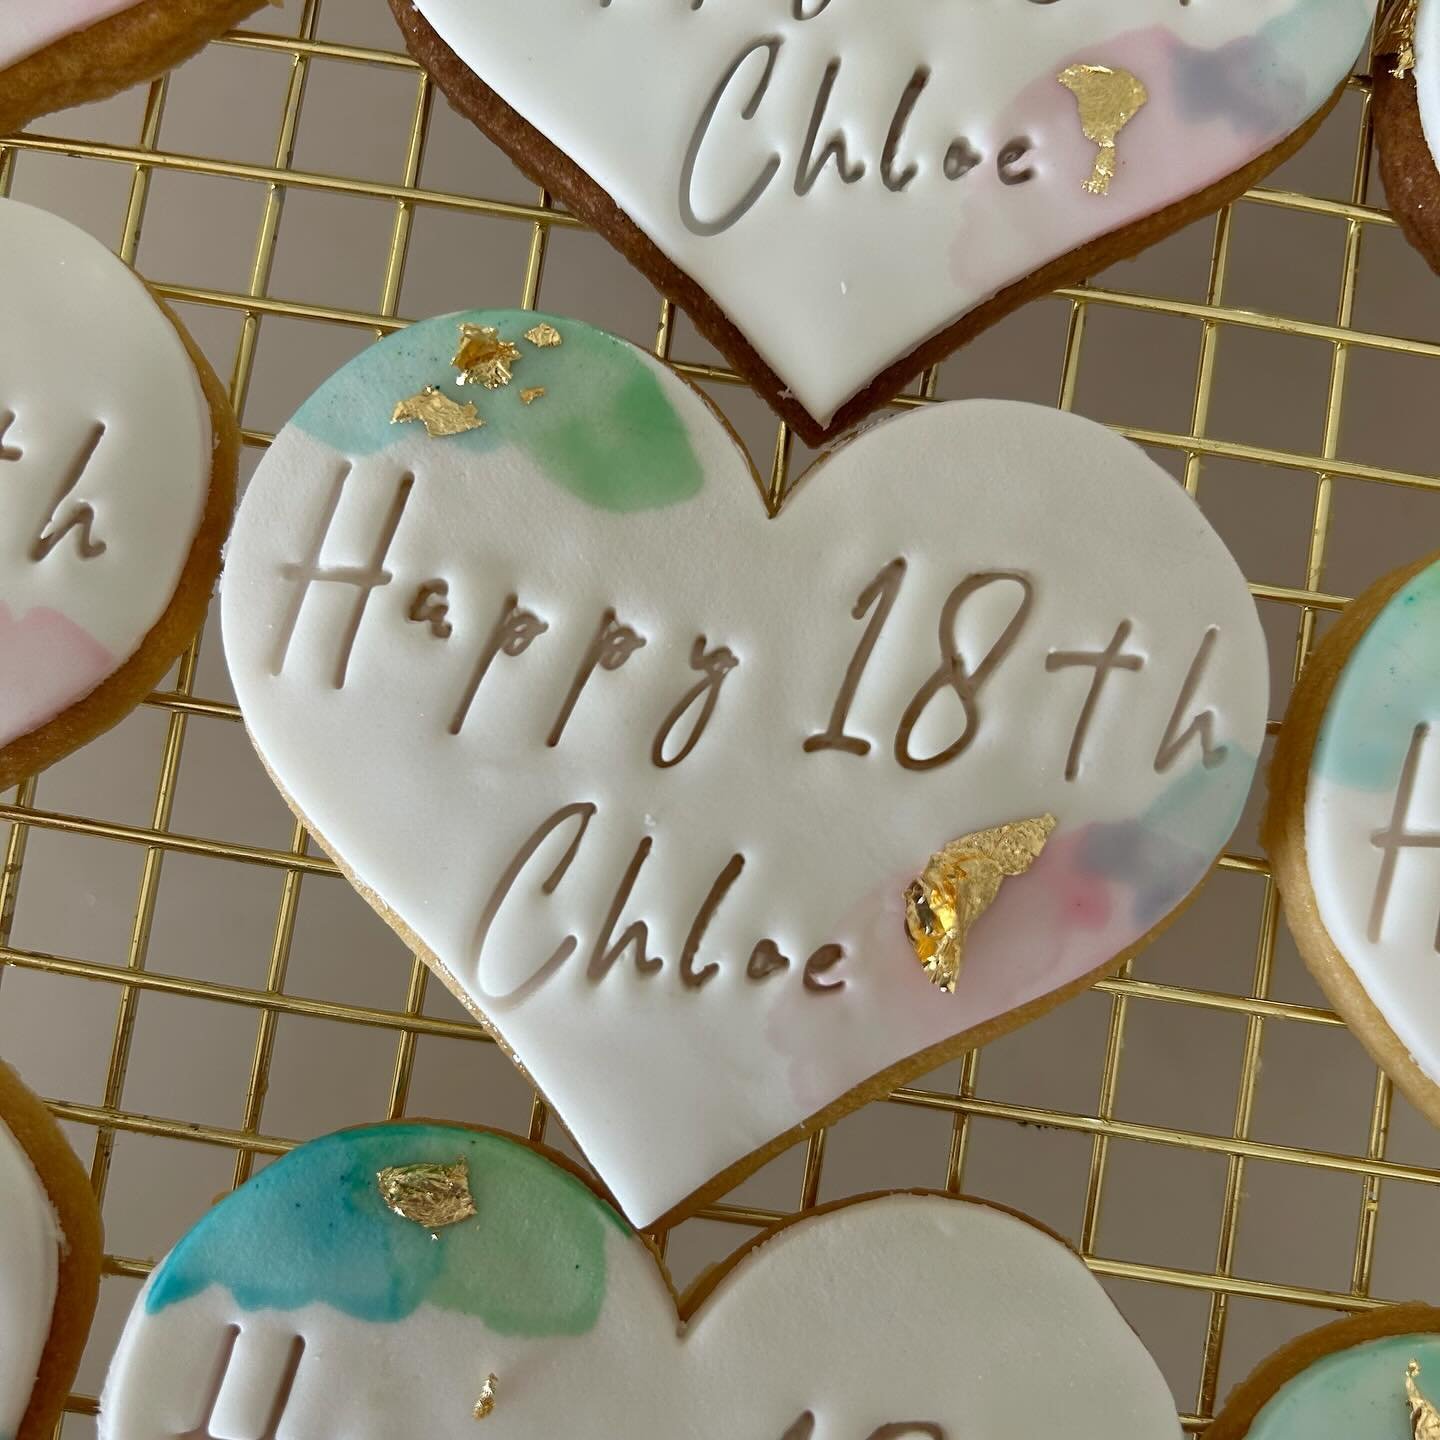 Enjoyed using my new script font set for Chloe&rsquo;s 18th! Happy Birthday! 💃💃💃 #sugarcookiesperth #sugarcookies #perthcookies #corporatecookies #corporatesugarcookies